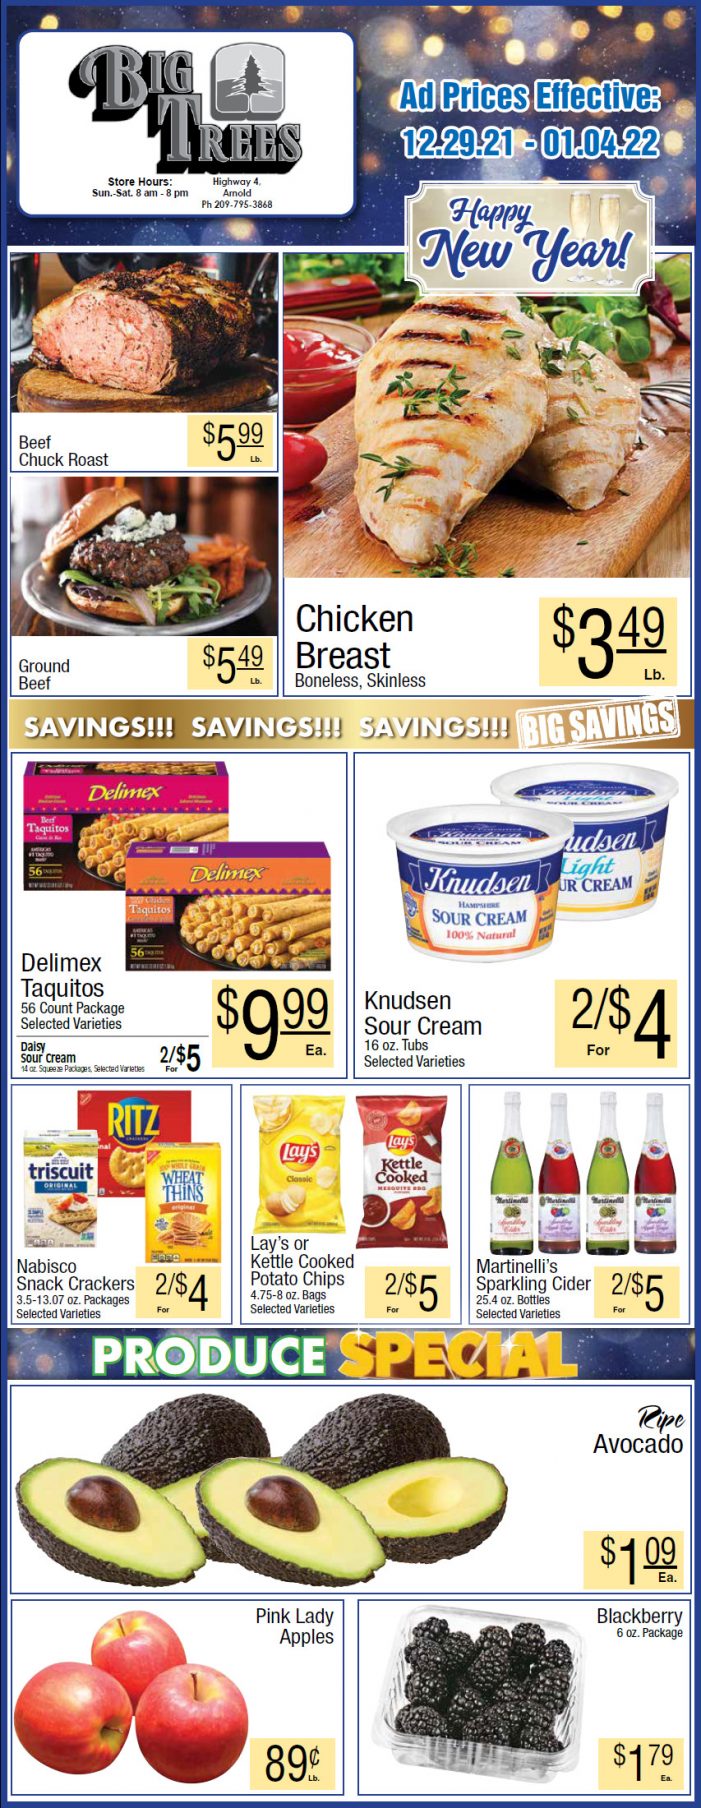 Big Trees Market Weekly Ad & Grocery Specials Through January 4th, 2022!  Shop Local & Save!